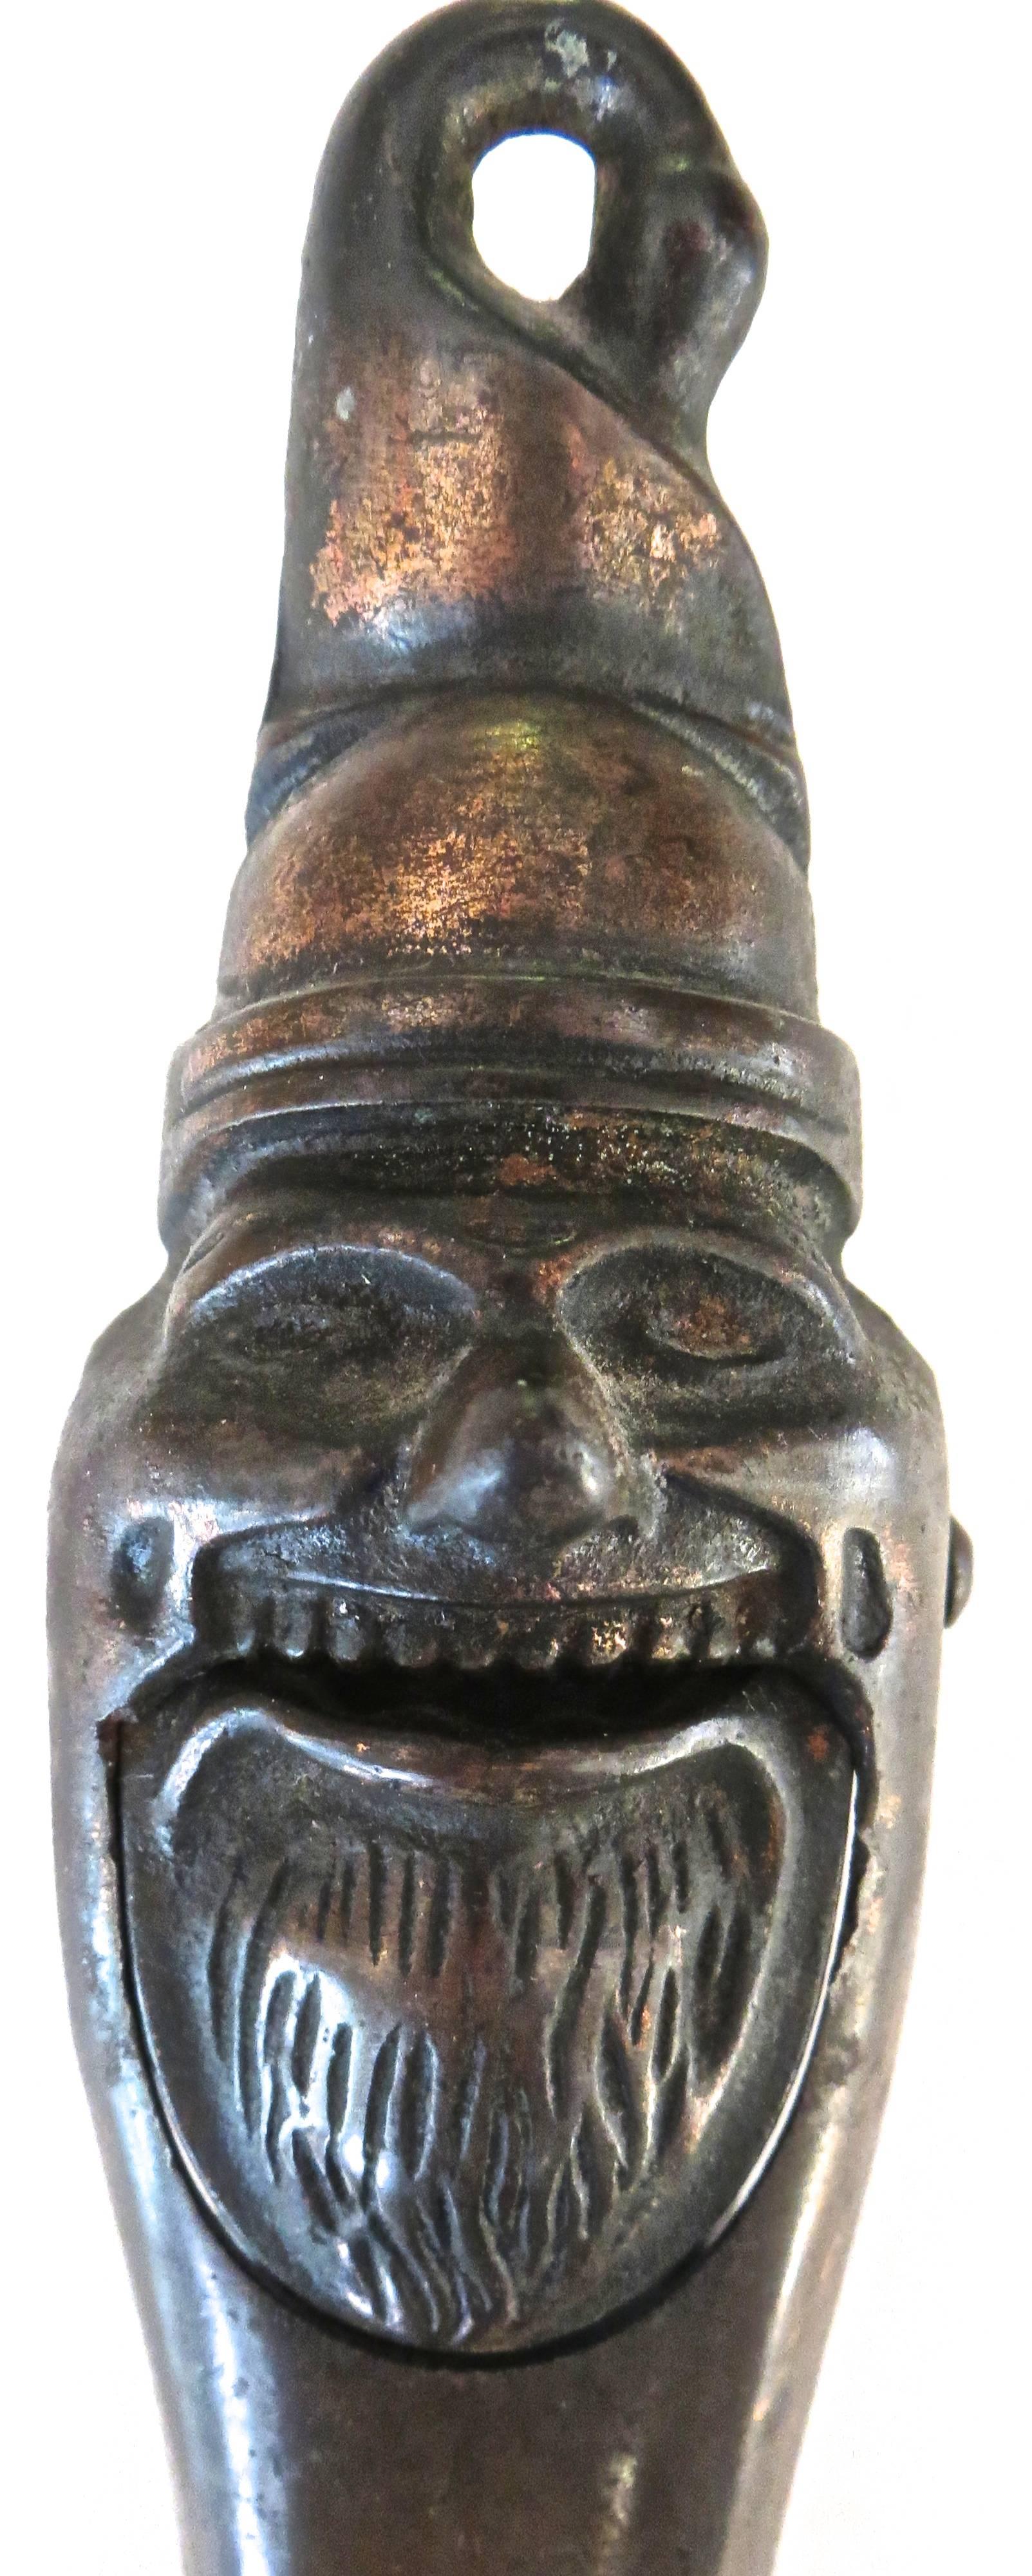 This copper-plated cast iron Santa Claus nutcracker was manufactured in England, circa 1880s. It pivots on an iron pin. The face is very finely cast detailing Santa's beard and facial characteristics. When open Santa's mouth opens wide ready to